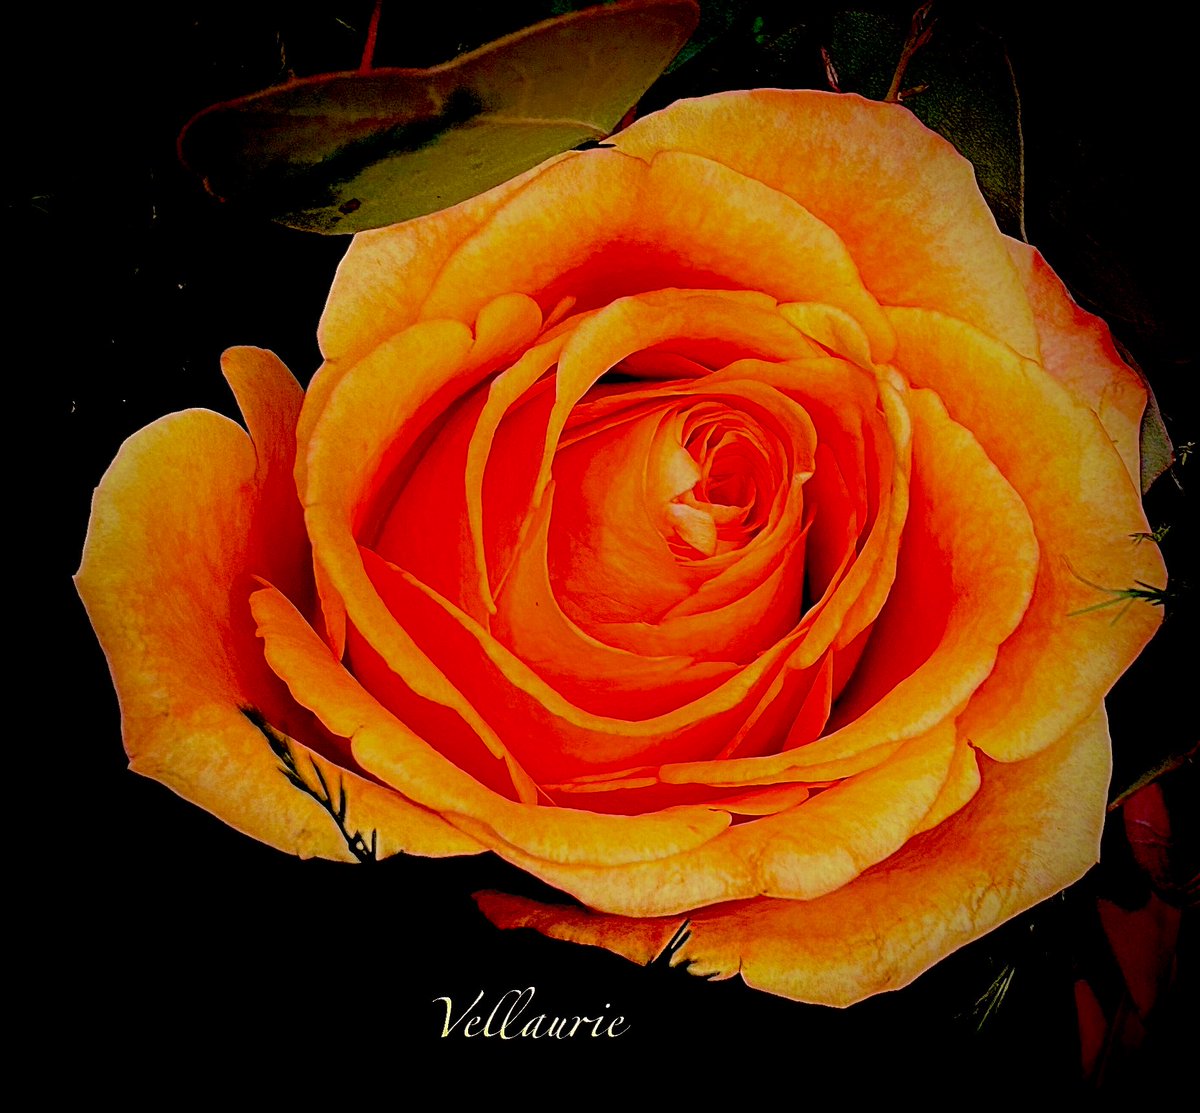 Happy #RoseWednesday! “Peach roses hold special meaning because they convey a sense of sincerity, genuineness, modesty, and gratitude. A bouquet of peach roses is an appropriate gift for saying 'thank you.' Thanks always Christine for your kindness 🌹Much appreciated 🙏🏼🕊️😊